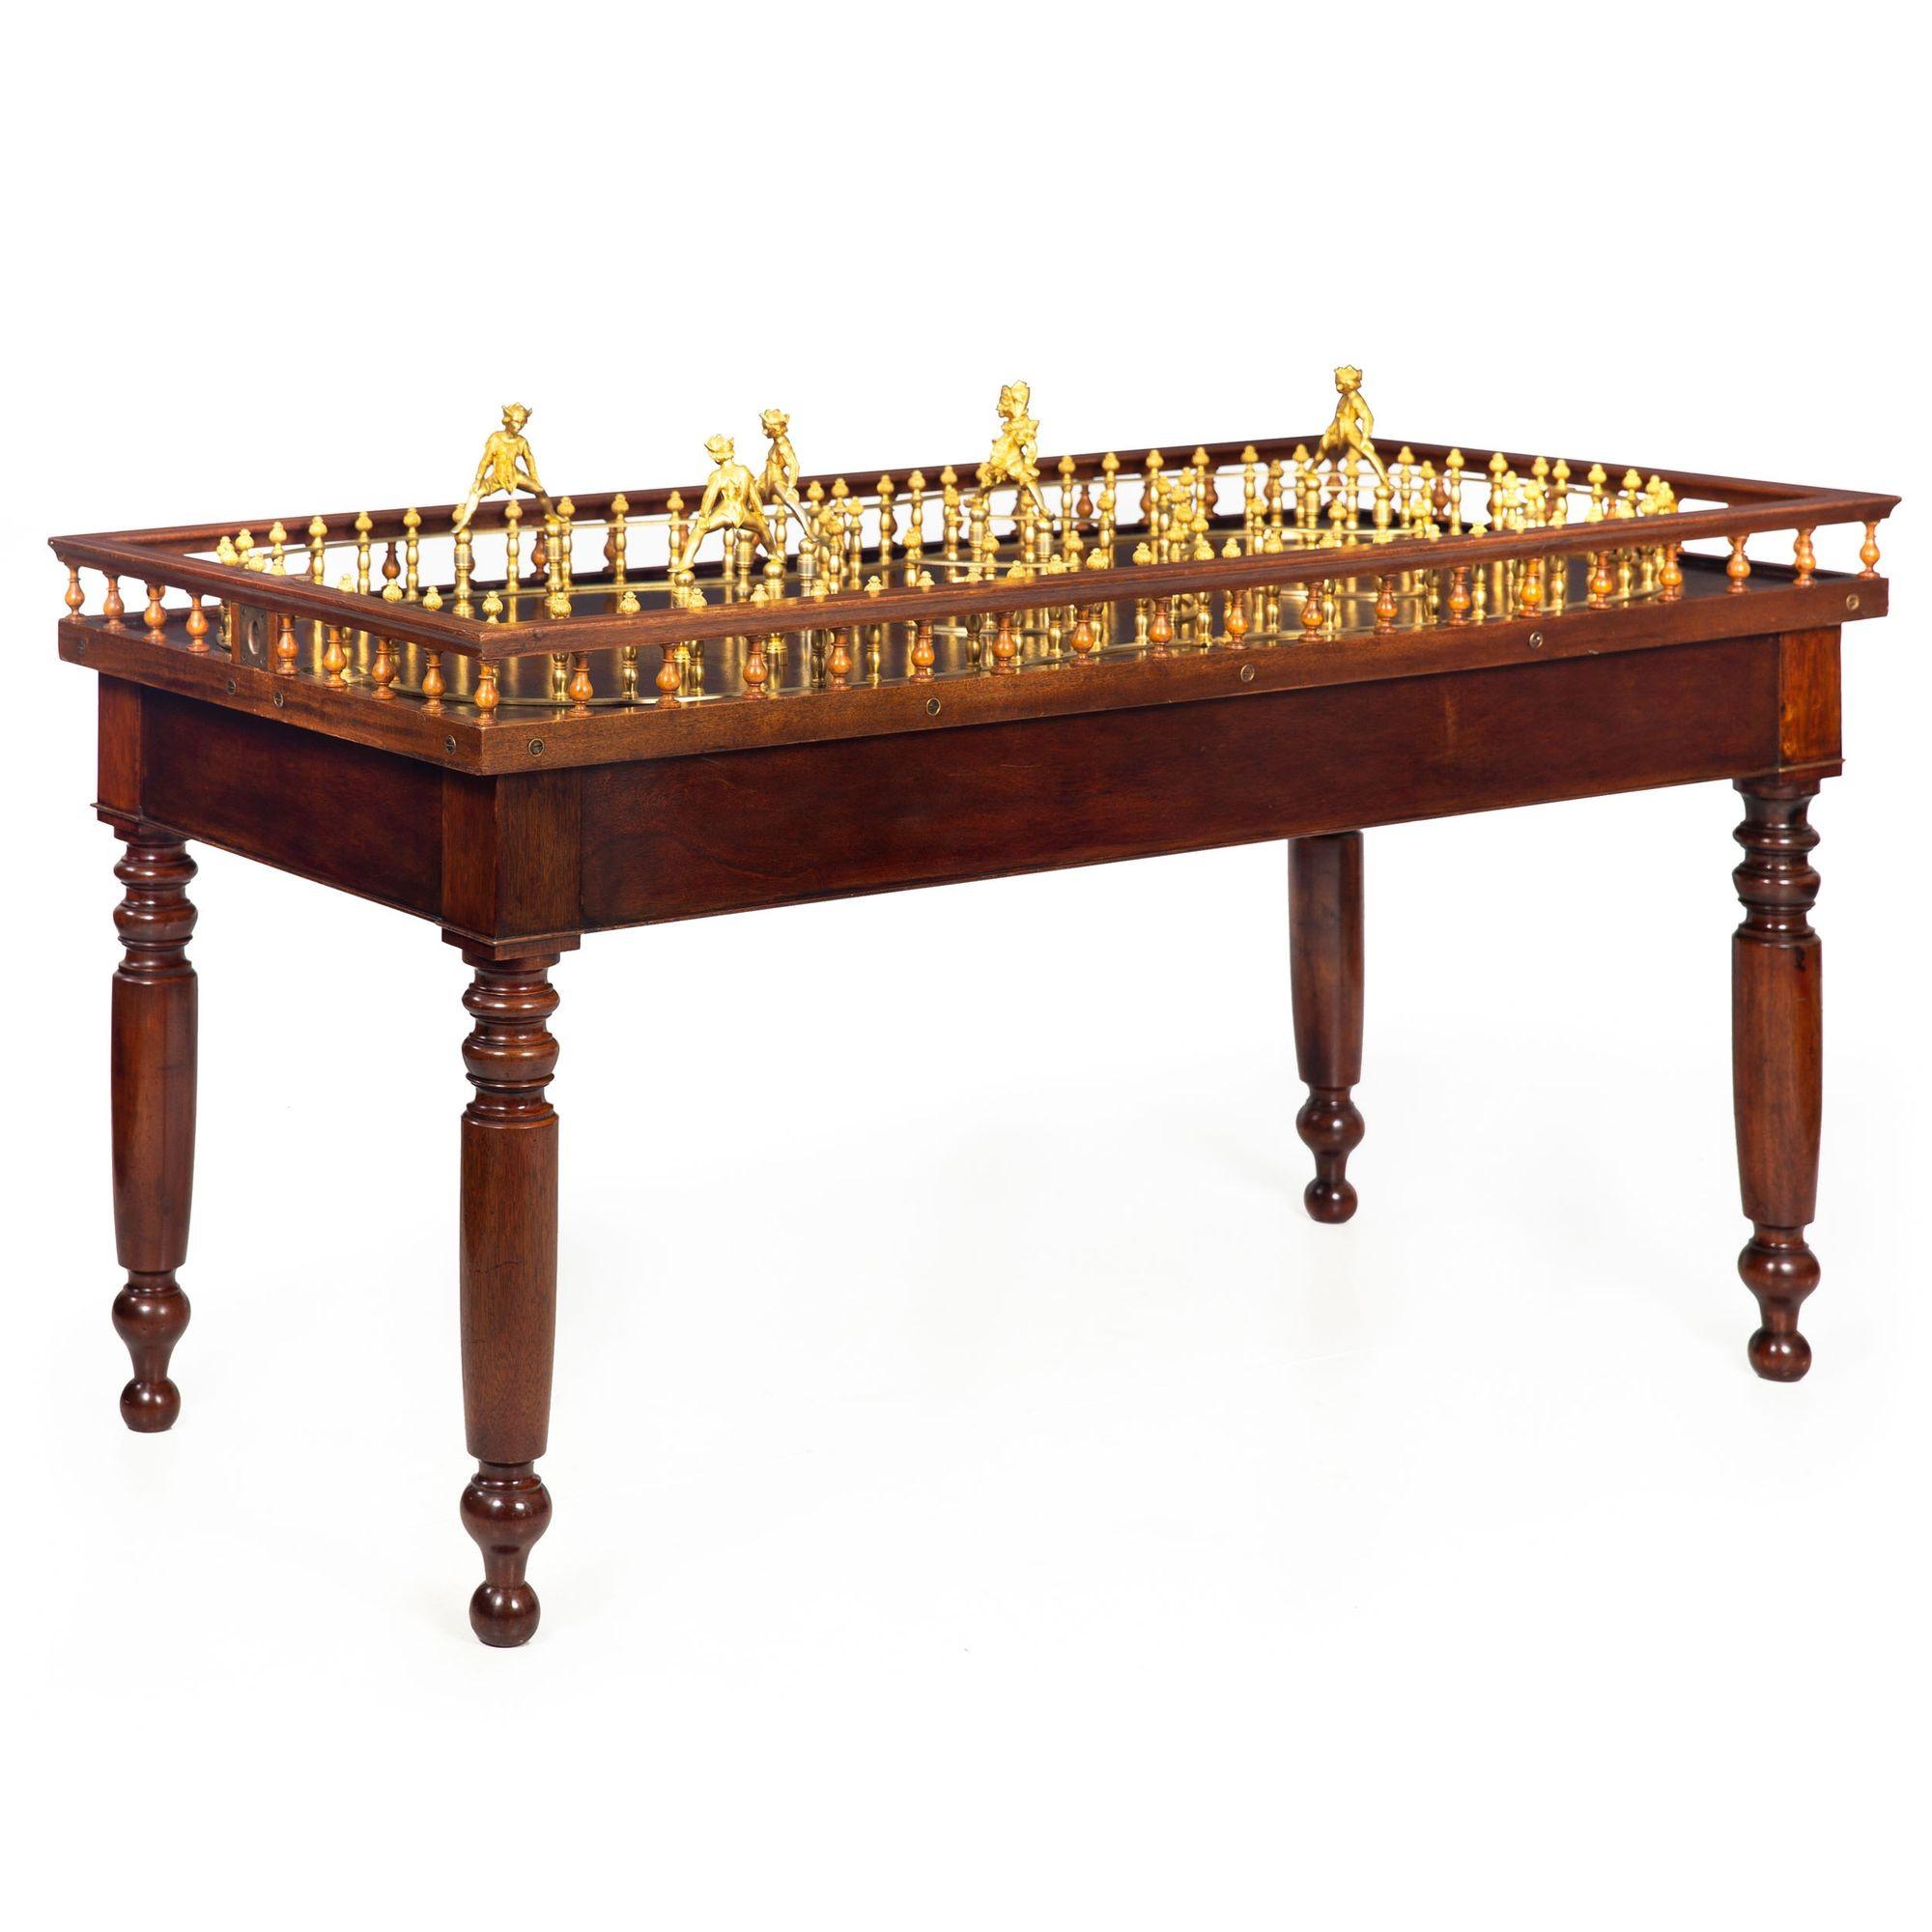 ENGLISH VICTORIAN MAHOGANY, BRASS AND GILT METAL SKITTLES-AND-TOP TABLE
Circa late 19th/early 20th century  retaining original skittle pins and metalwork throughout  unmarked
Item # 310IJR04A

This English 